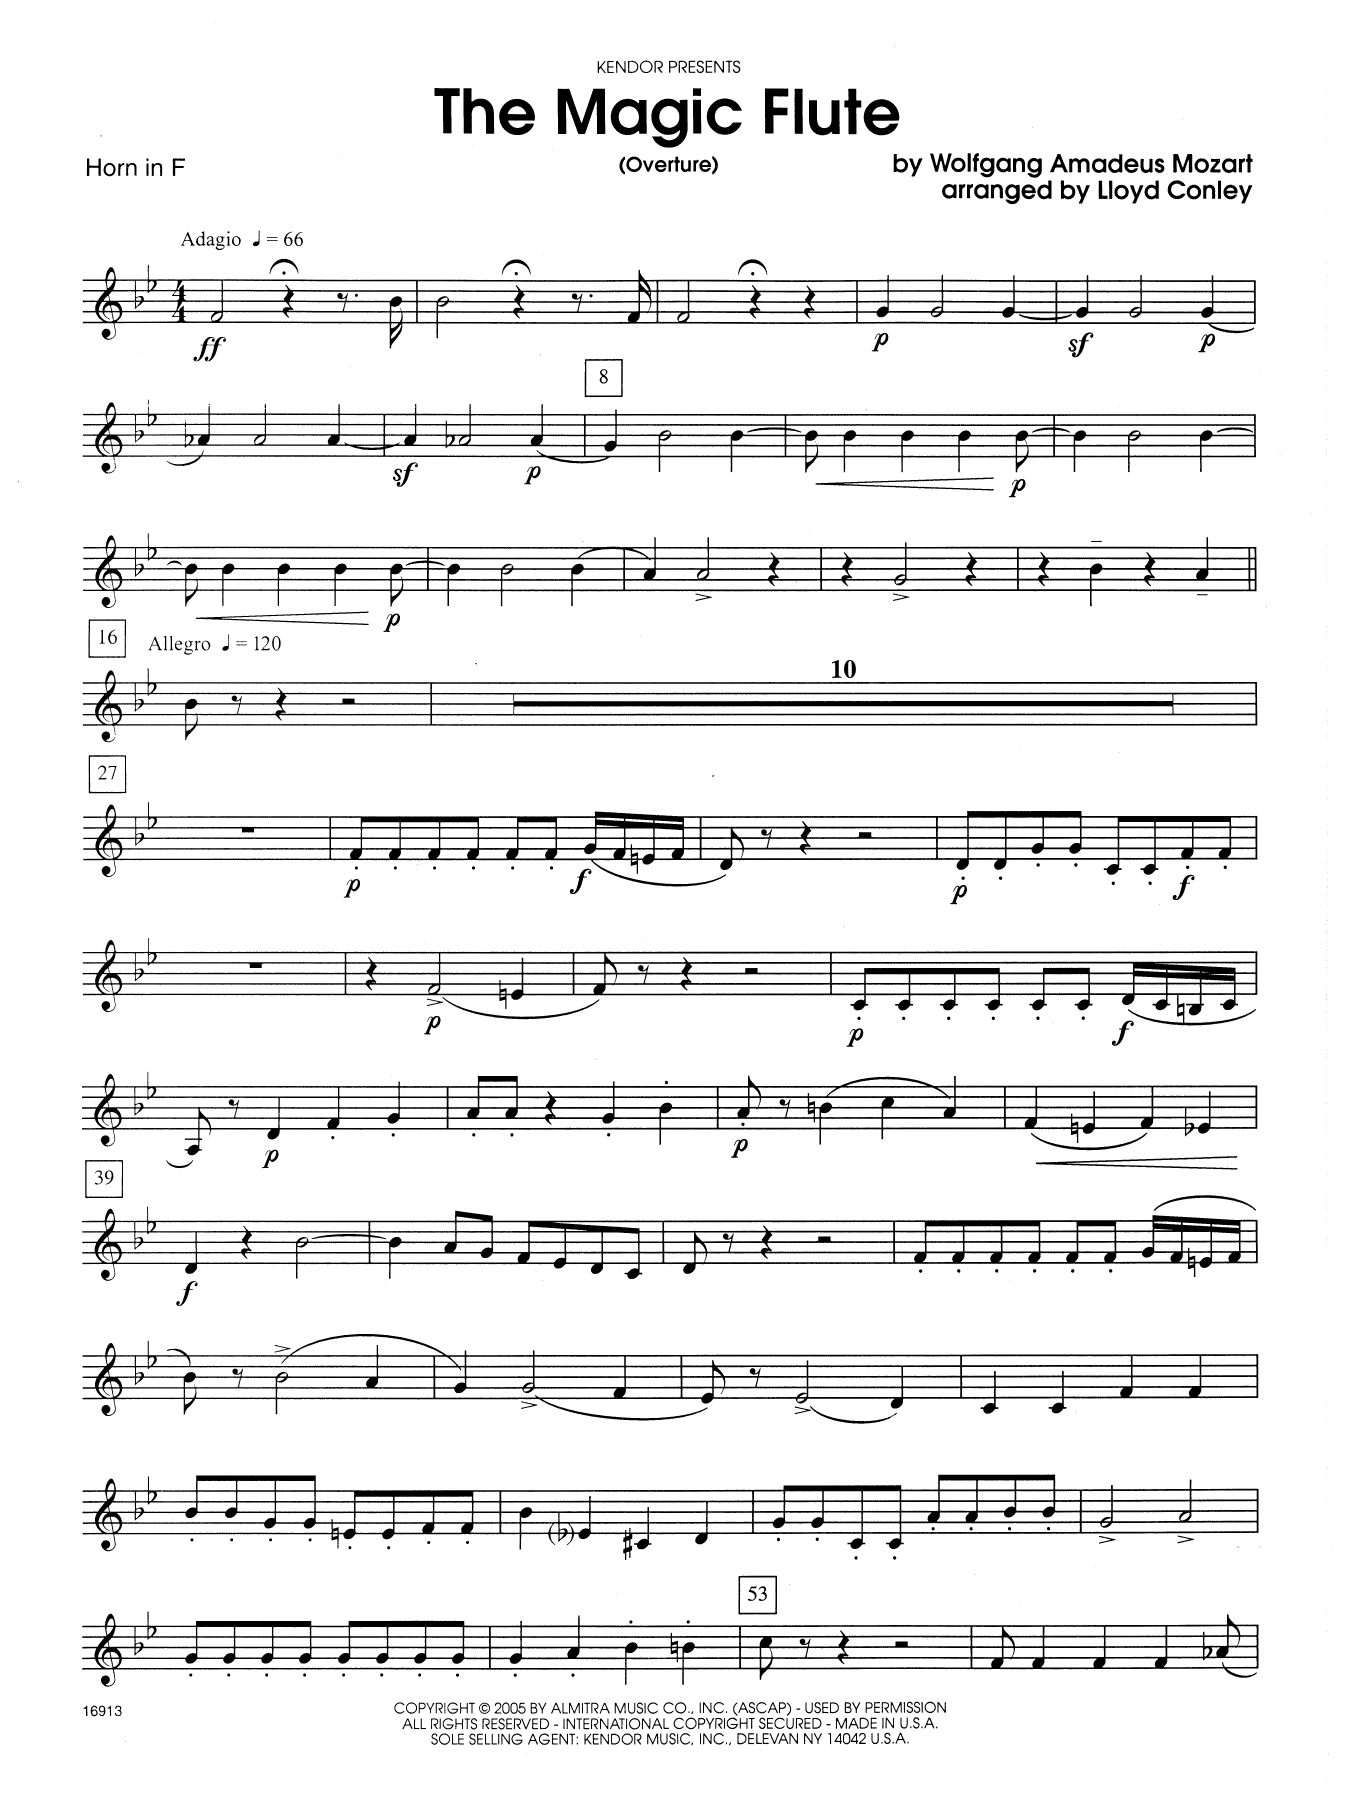 Download Lloyd Conley The Magic Flute (Overture) - Horn in F Sheet Music